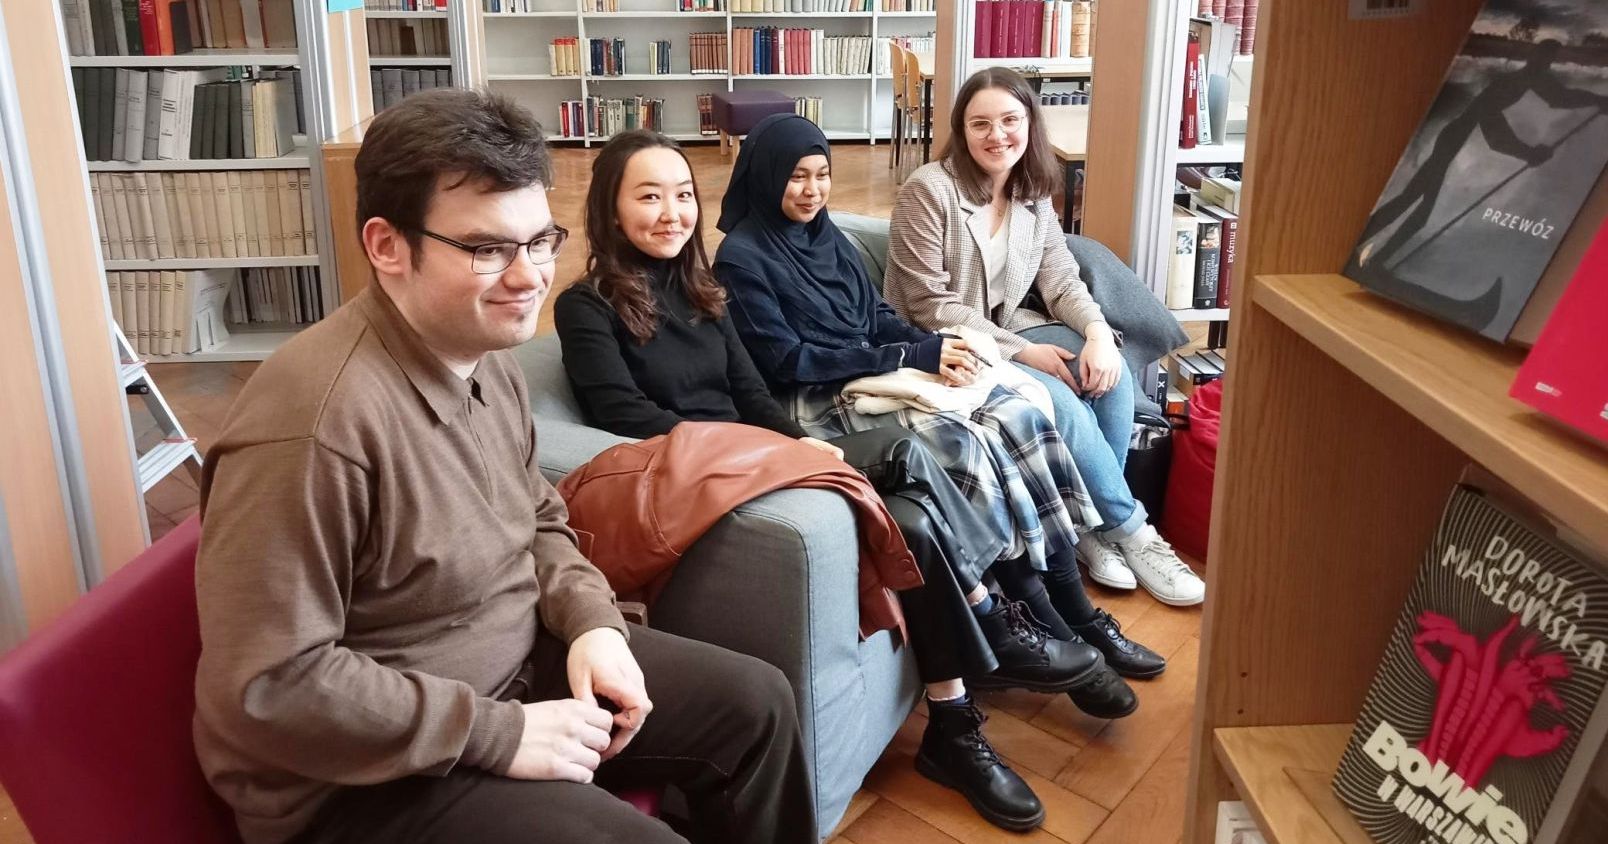  A group of international students on the background of bookshelves